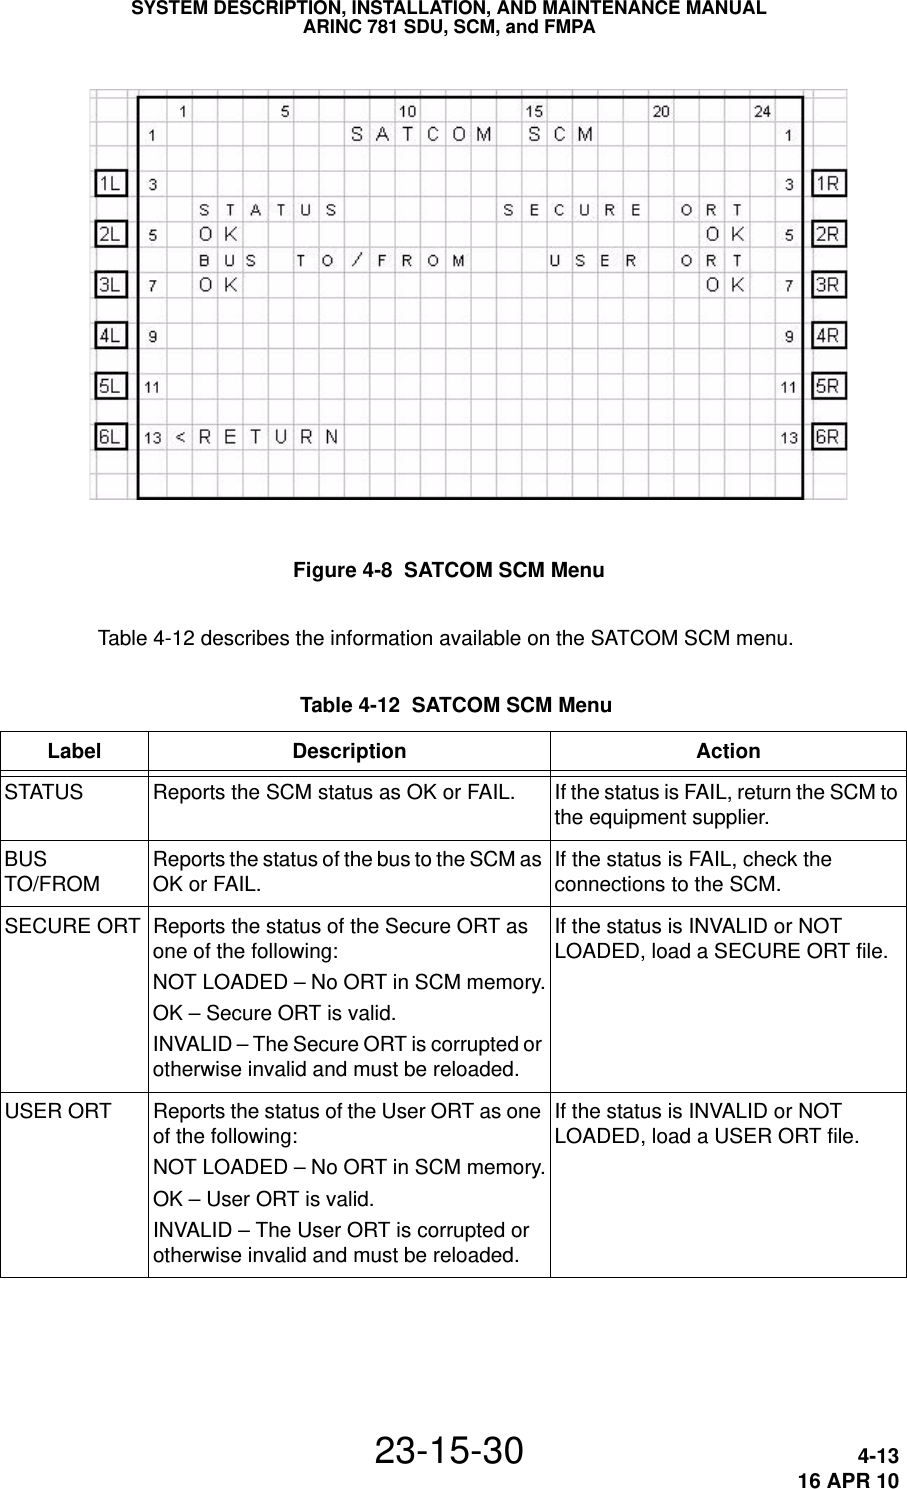 SYSTEM DESCRIPTION, INSTALLATION, AND MAINTENANCE MANUALARINC 781 SDU, SCM, and FMPA23-15-30 4-1316 APR 10 Figure 4-8  SATCOM SCM MenuTable 4-12 describes the information available on the SATCOM SCM menu. Table 4-12  SATCOM SCM Menu Label Description ActionSTATUS Reports the SCM status as OK or FAIL. If the status is FAIL, return the SCM to the equipment supplier.BUS TO/FROMReports the status of the bus to the SCM as OK or FAIL.If the status is FAIL, check the connections to the SCM.SECURE ORT Reports the status of the Secure ORT as one of the following:NOT LOADED – No ORT in SCM memory.OK – Secure ORT is valid.INVALID – The Secure ORT is corrupted or otherwise invalid and must be reloaded.If the status is INVALID or NOT LOADED, load a SECURE ORT file.USER ORT Reports the status of the User ORT as one of the following:NOT LOADED – No ORT in SCM memory.OK – User ORT is valid.INVALID – The User ORT is corrupted or otherwise invalid and must be reloaded.If the status is INVALID or NOT LOADED, load a USER ORT file.